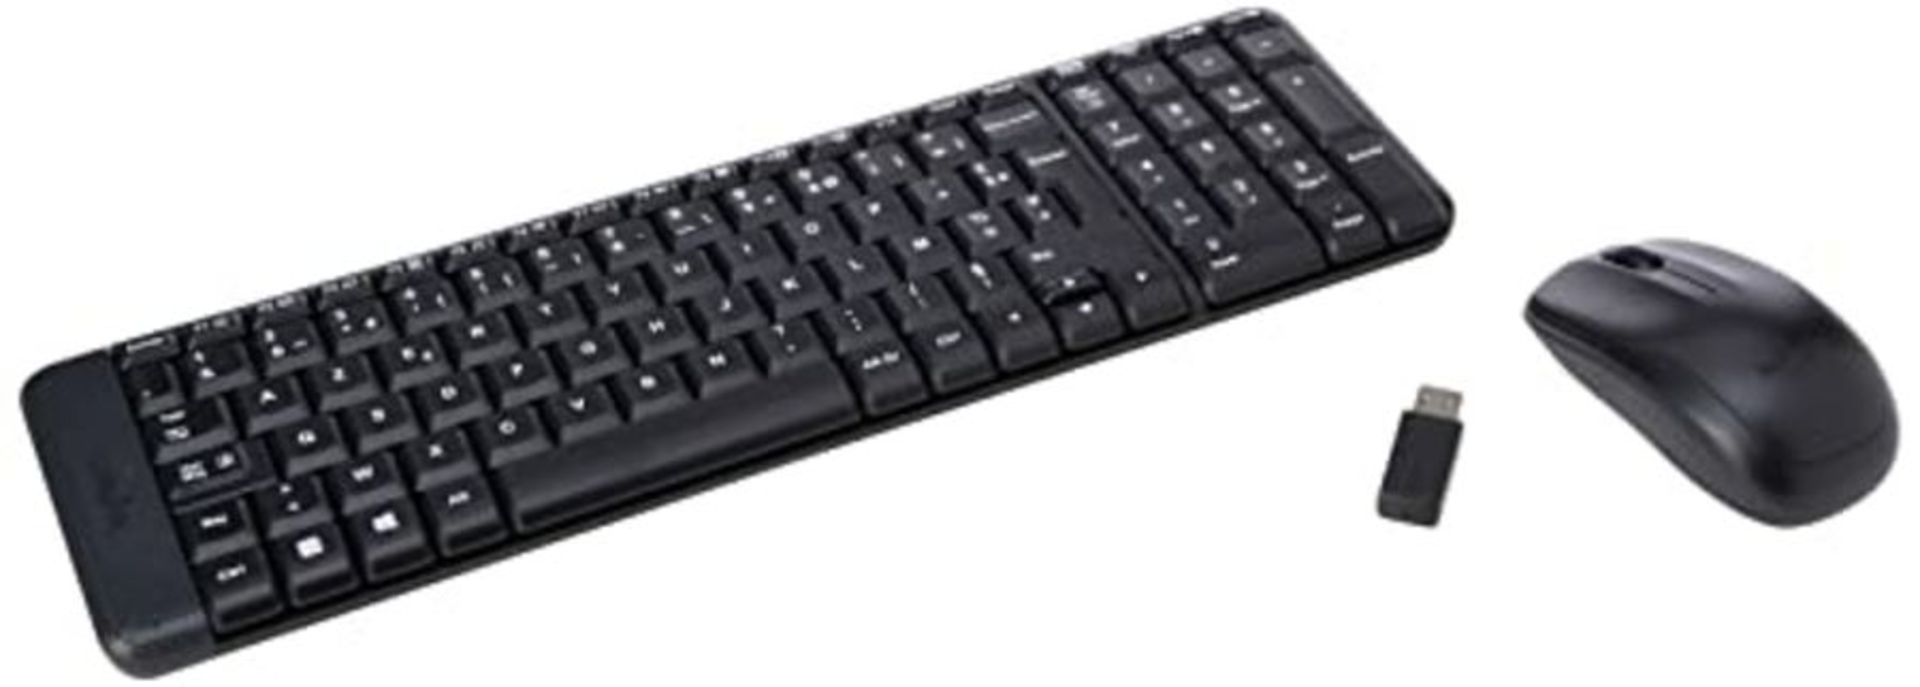 Logitech MK220 Compact Wireless Keyboard and Mouse Combo for Windows, AZERTY French La